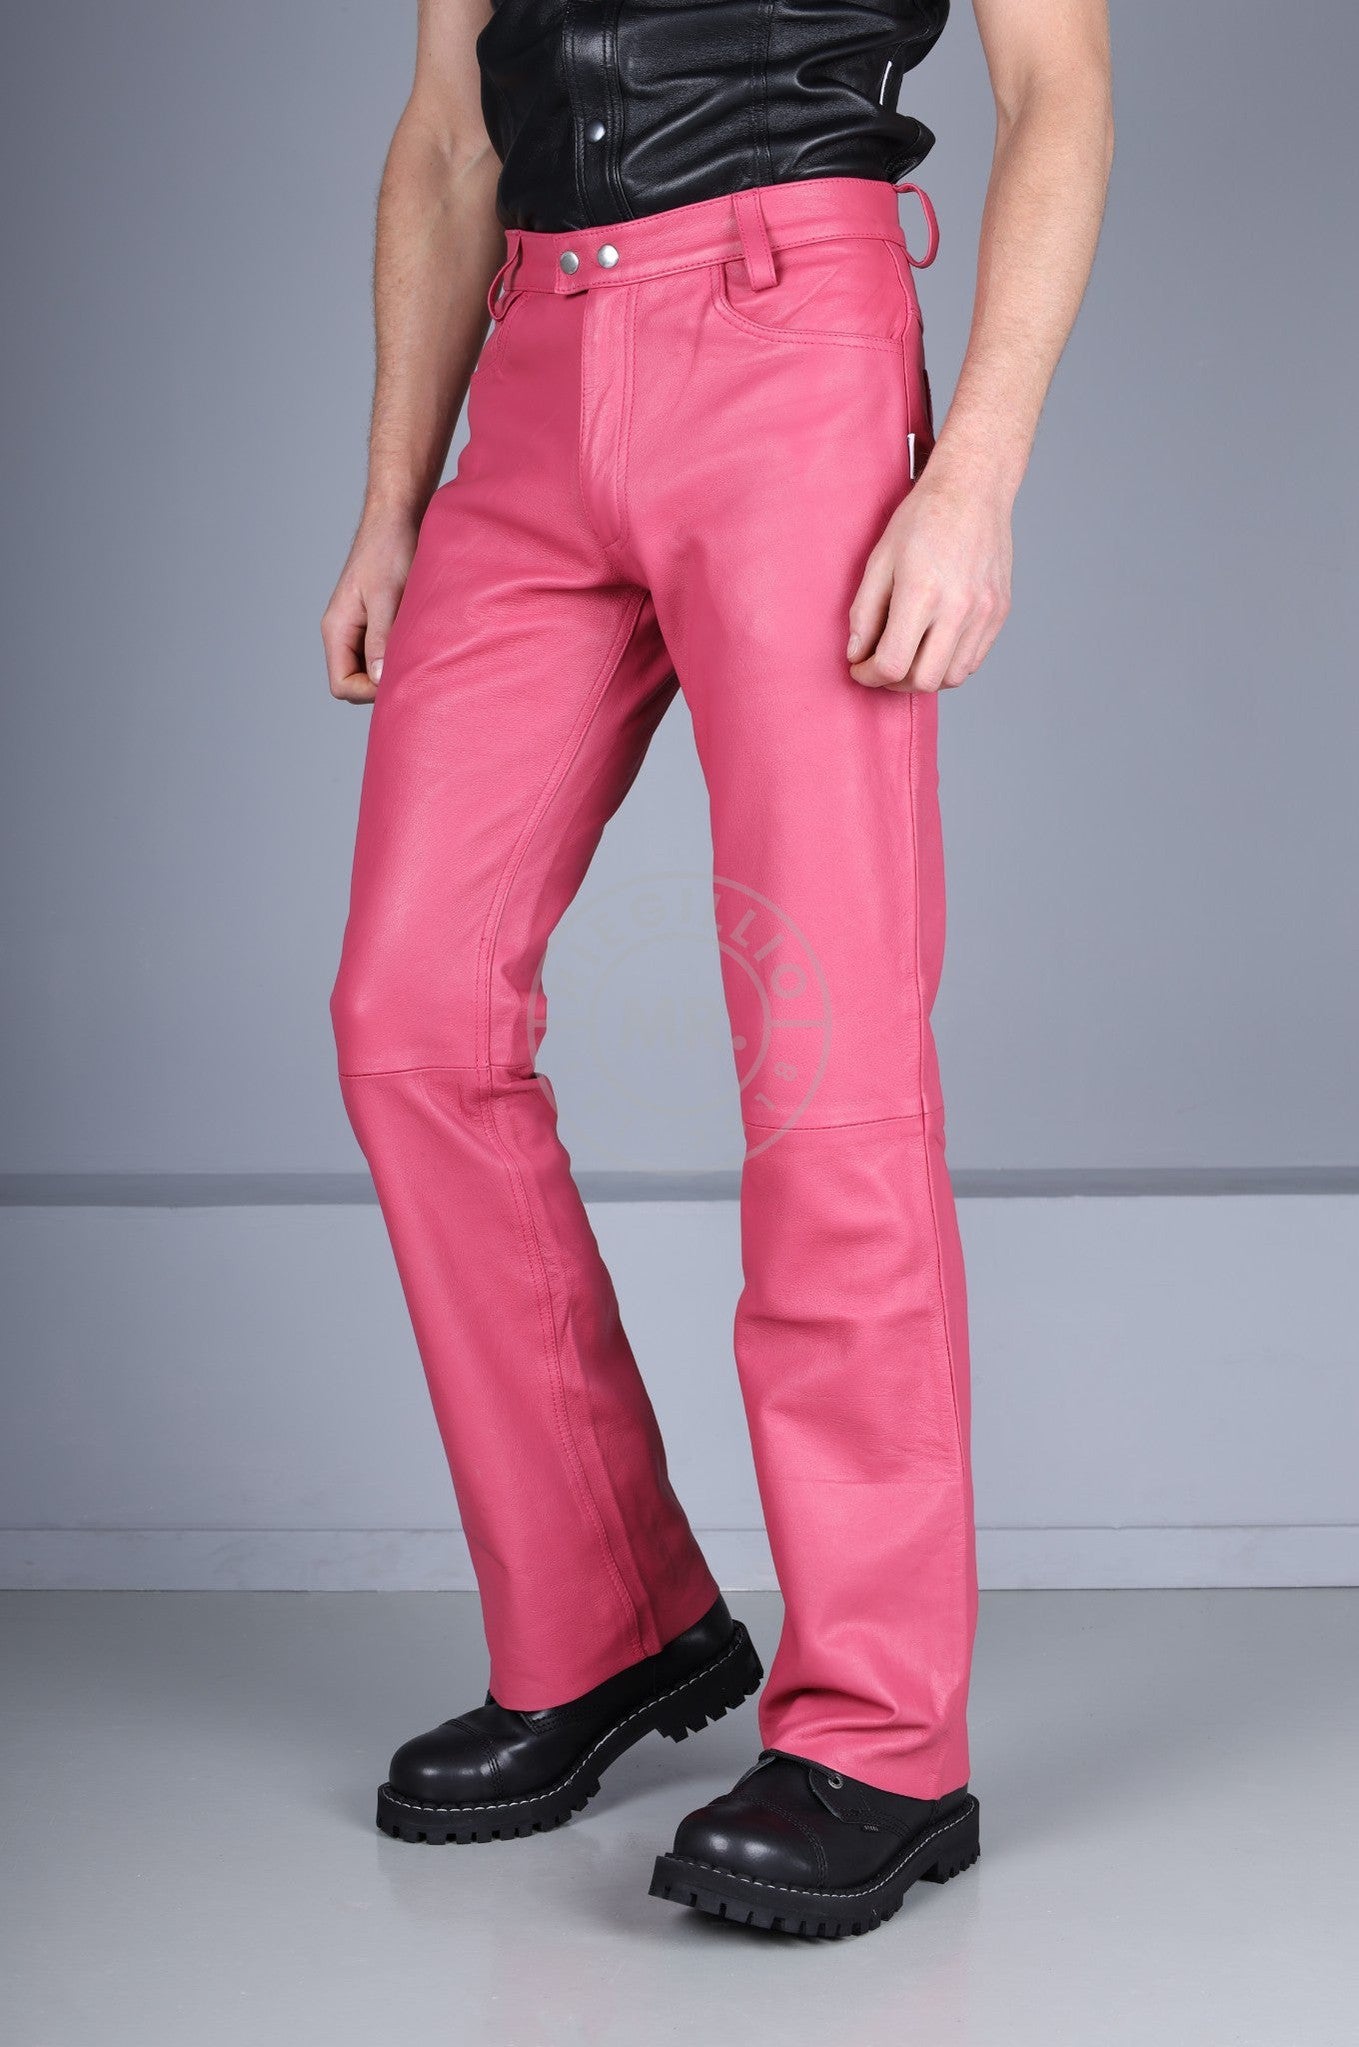 Pink Leather Bootcut Pants at MR. Riegillio